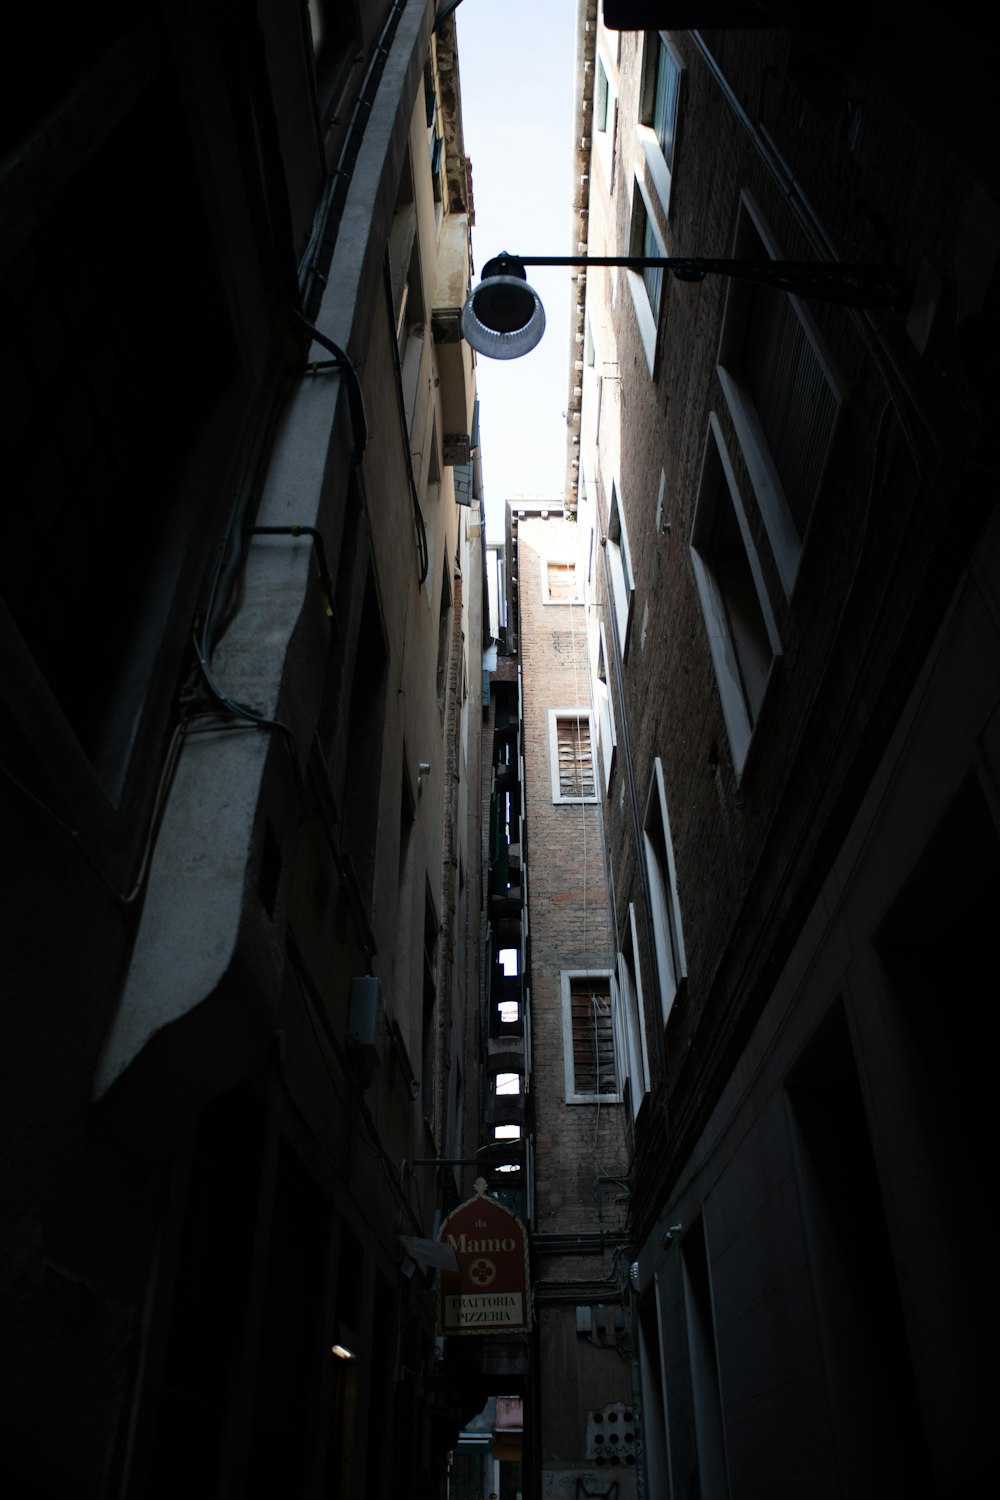 a narrow alleyway in a city with a street light